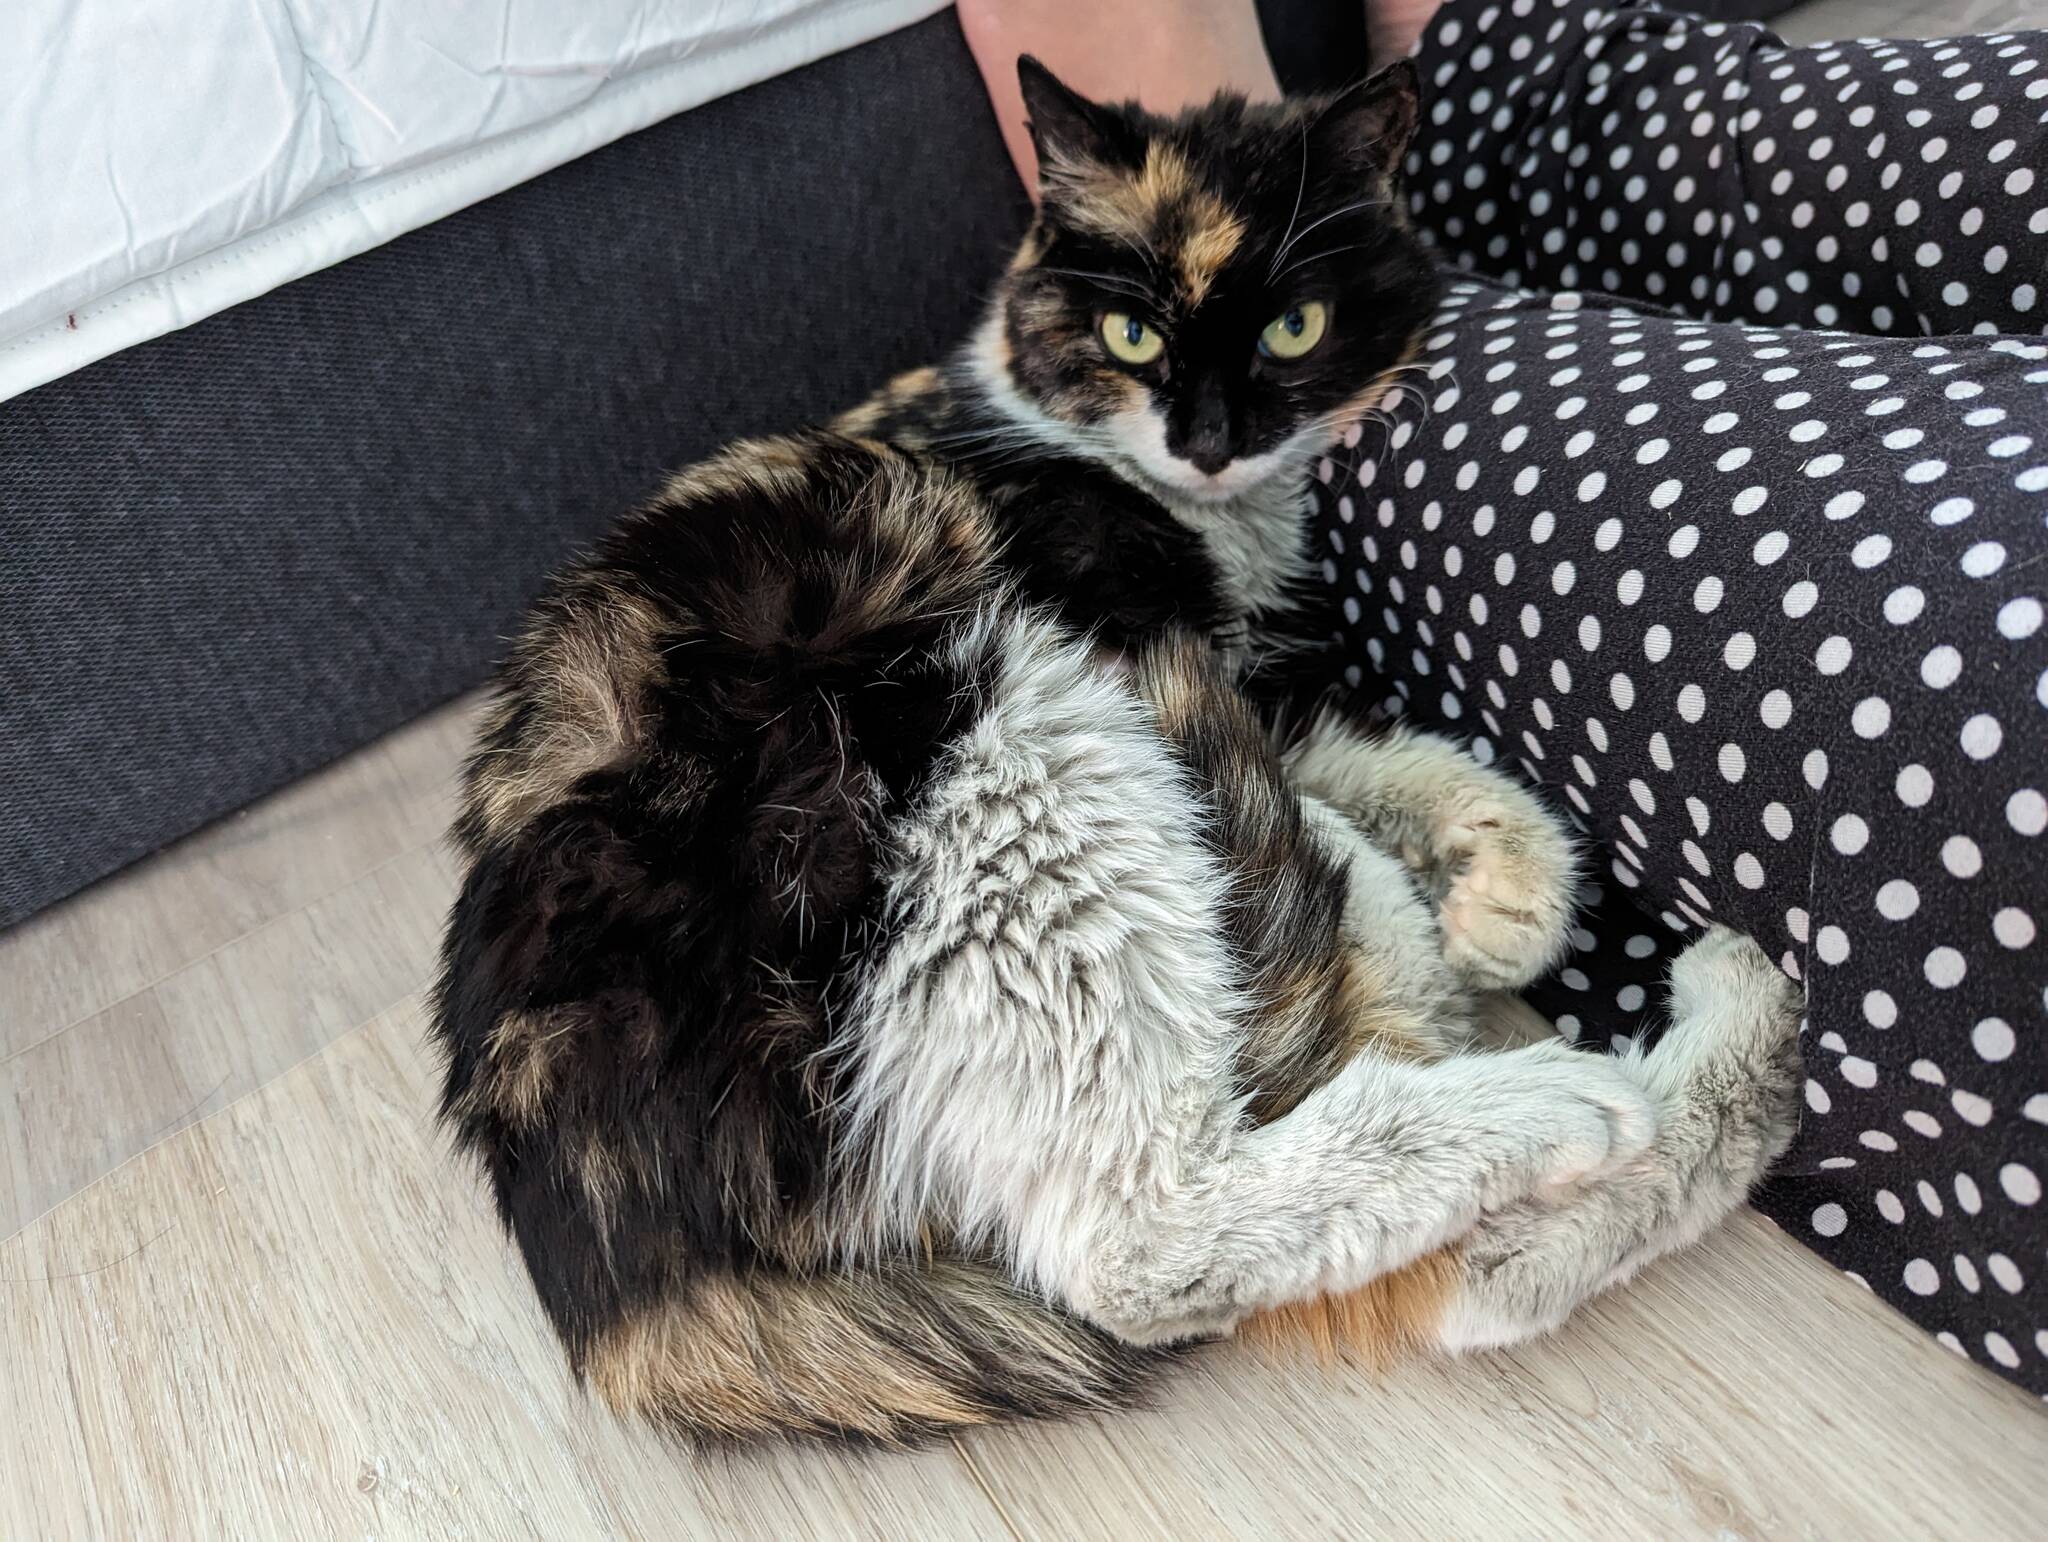 BC SPCA say a cat was recently found by Canadian Border Service Agency officers at Vancouver International Mail Centre in Richmond in a box that had travelled from China. Precious Cargo, as she was named by BC SPCA, is now in a foster home waiting to be adopted officially. (BC SPCA)